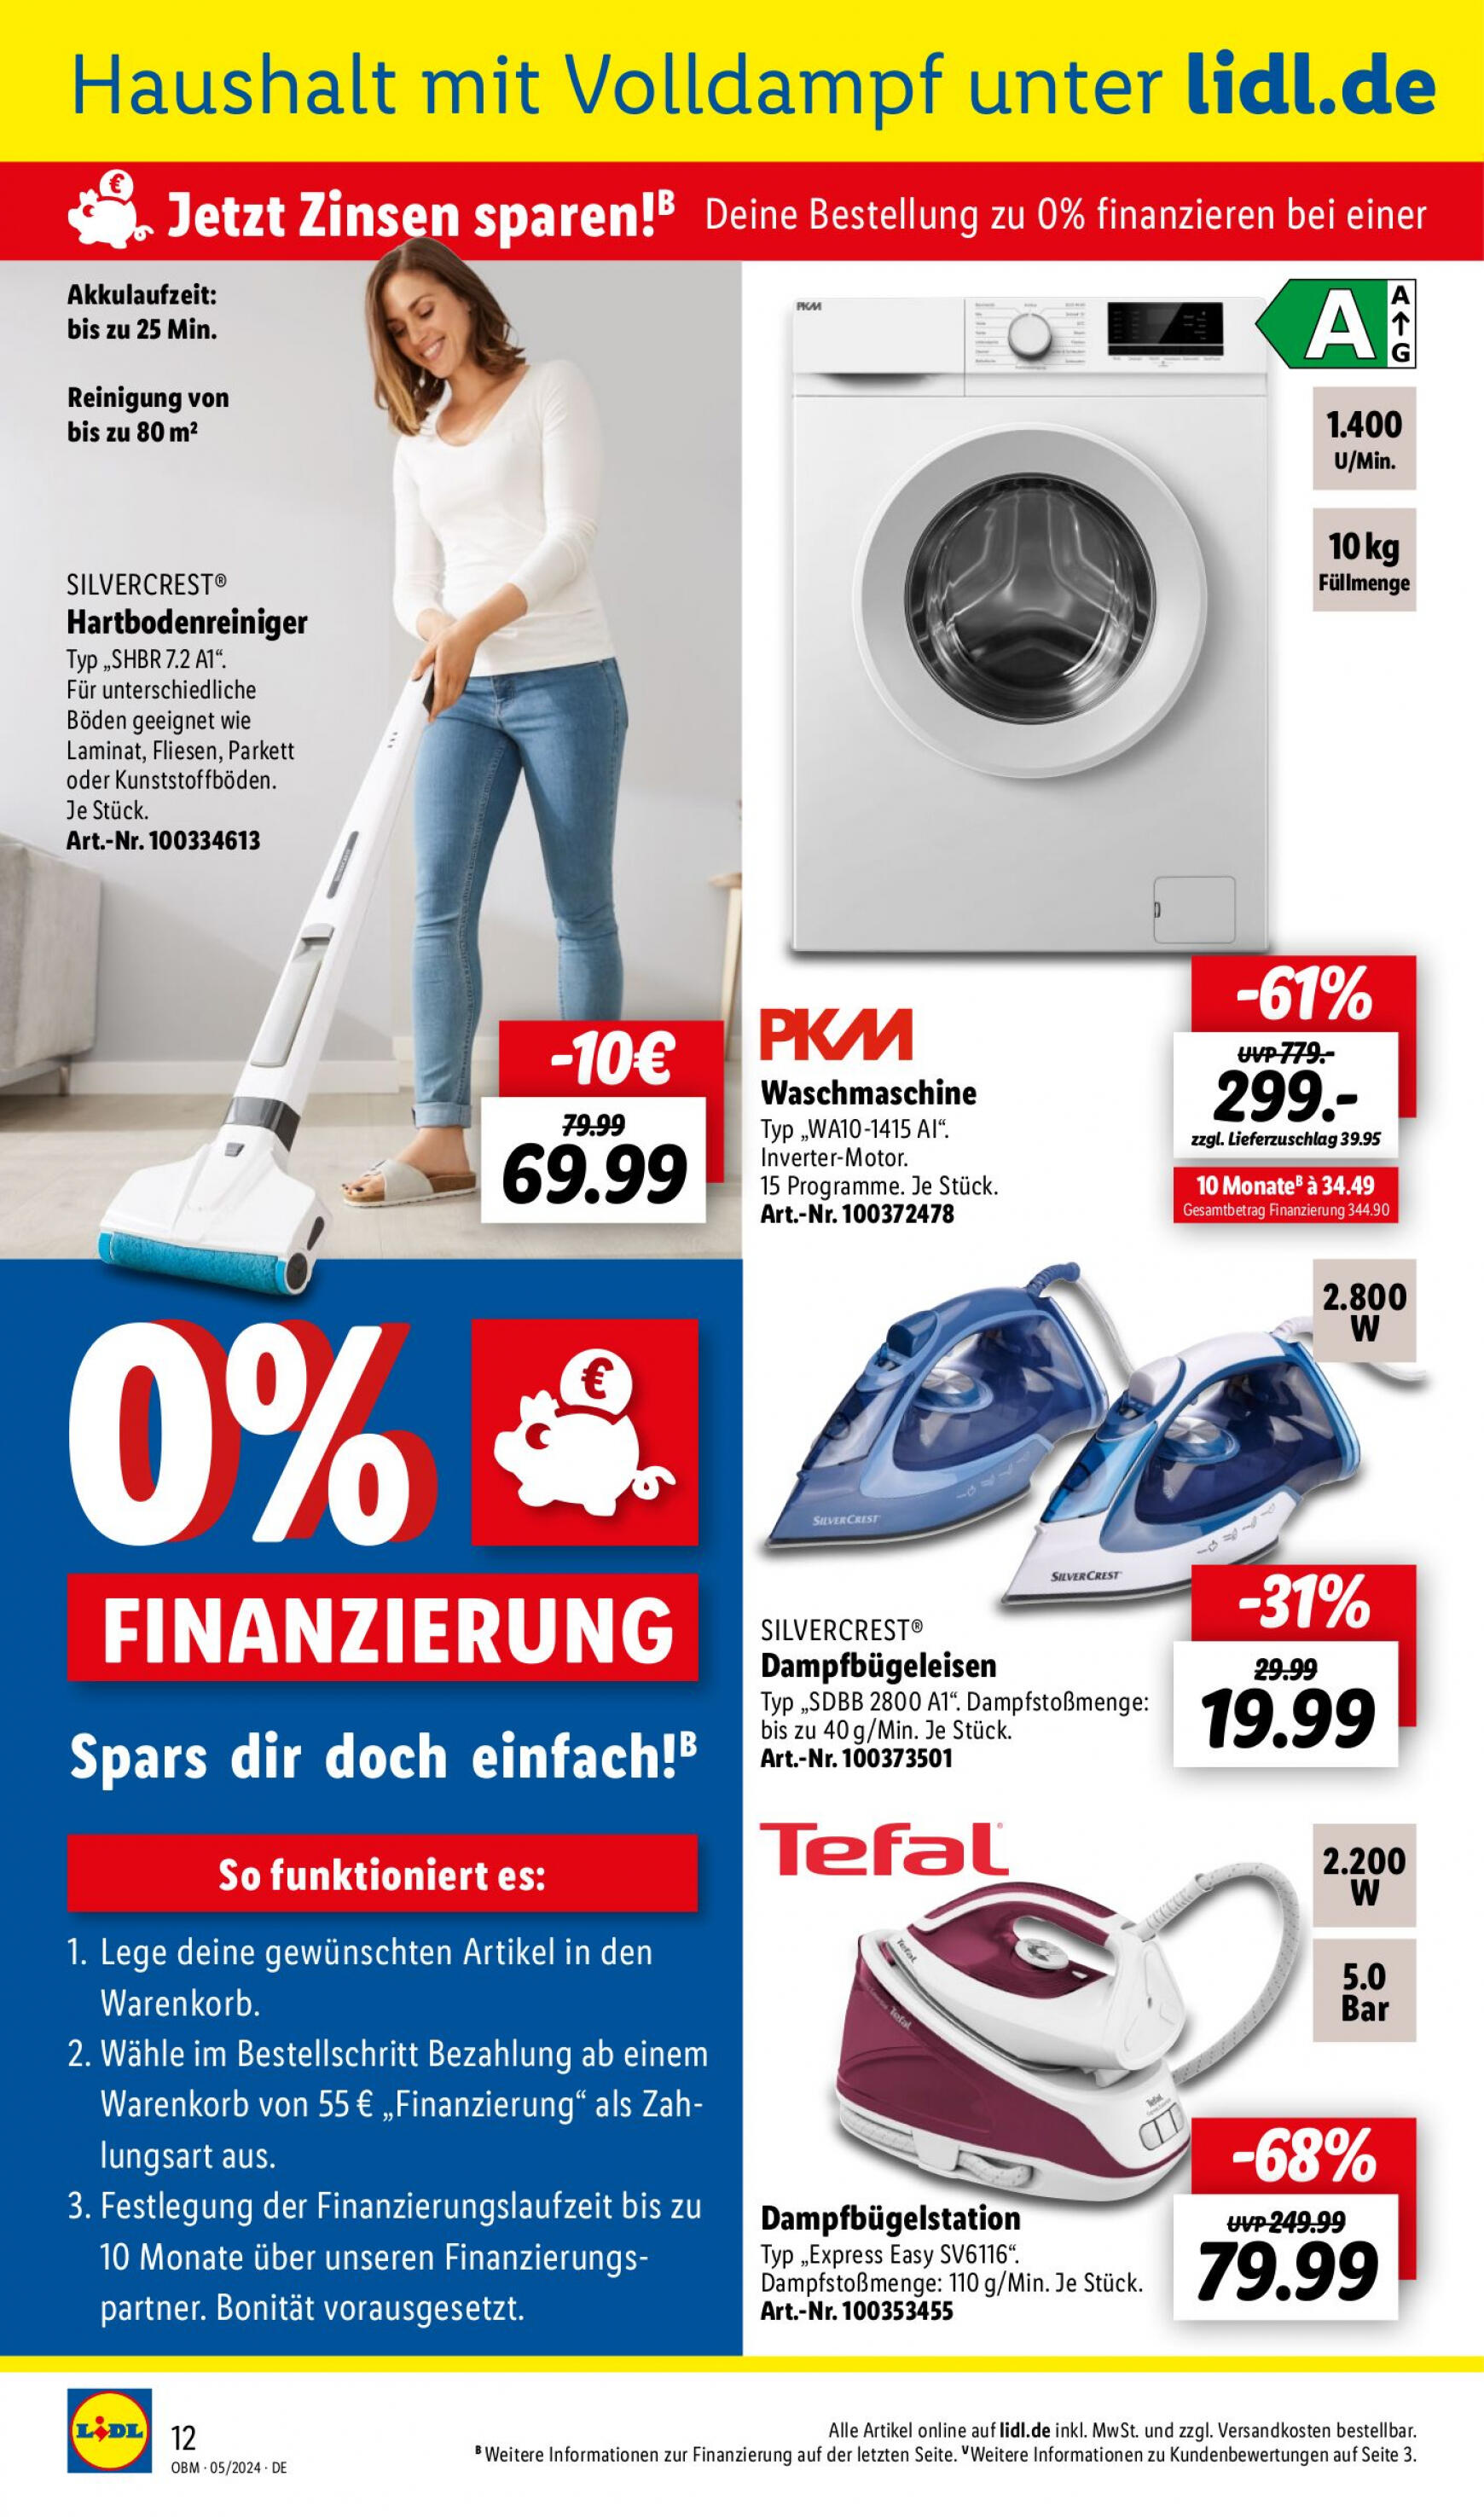 lidl - Flyer Lidl - Aktuelle Onlineshop-Highlights aktuell 01.05. - 31.05. - page: 12